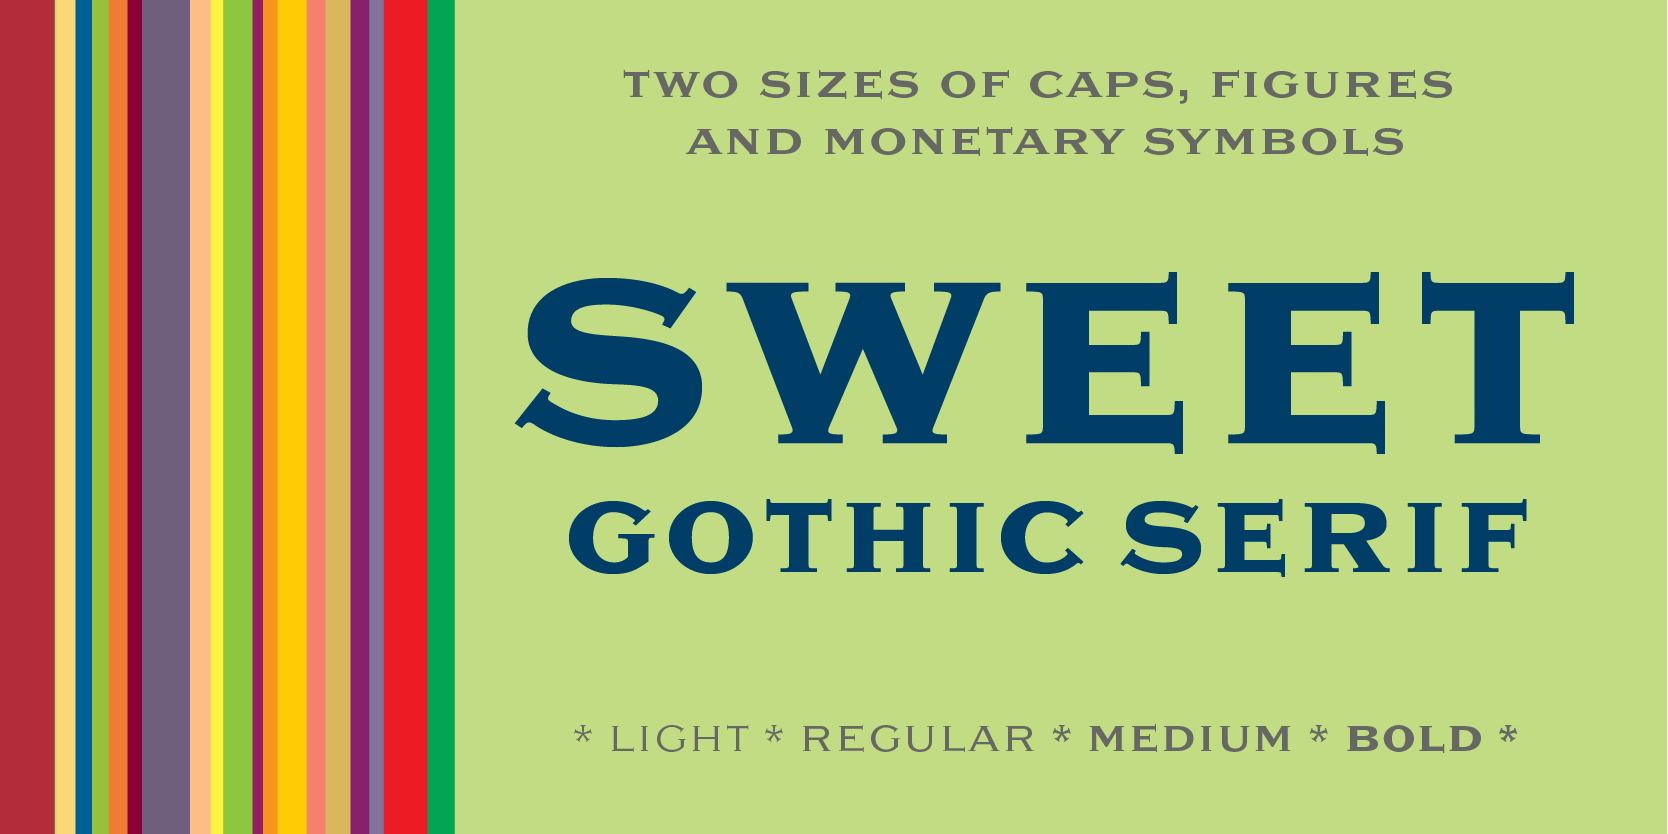 Card displaying Sweet Gothic Serif typeface in various styles